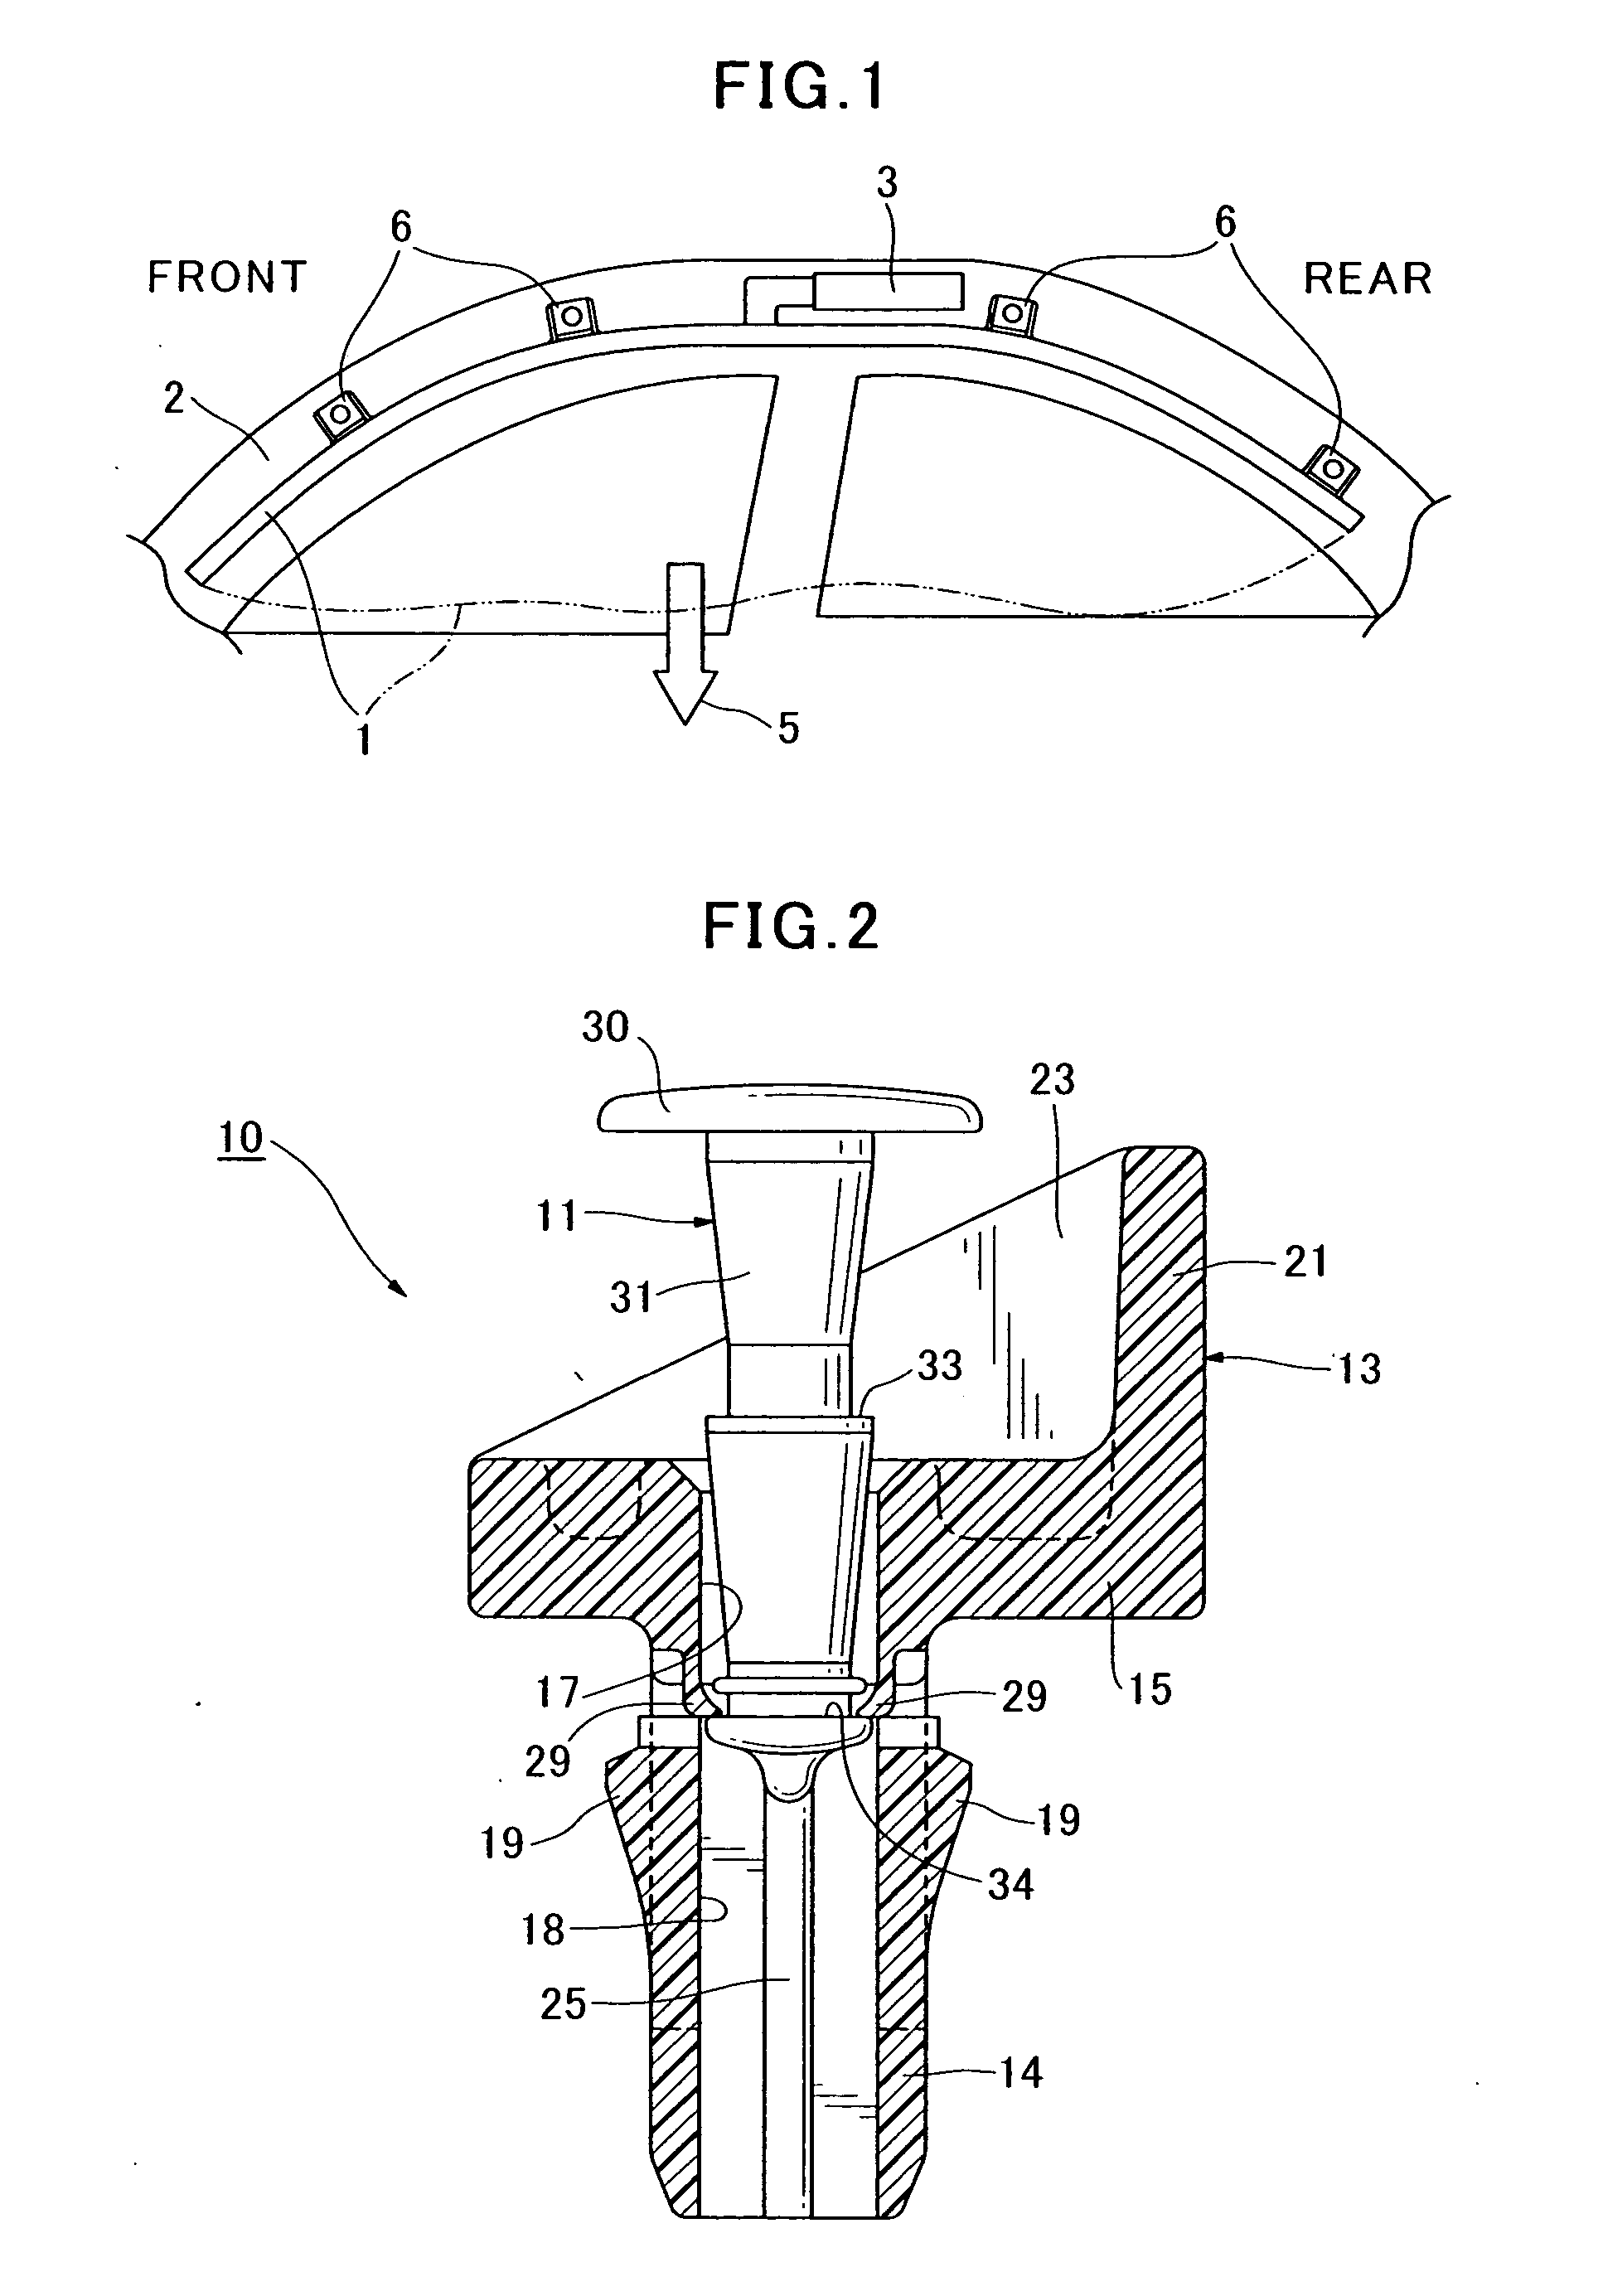 Curtain-shield airbag clip and assemblies using the clip